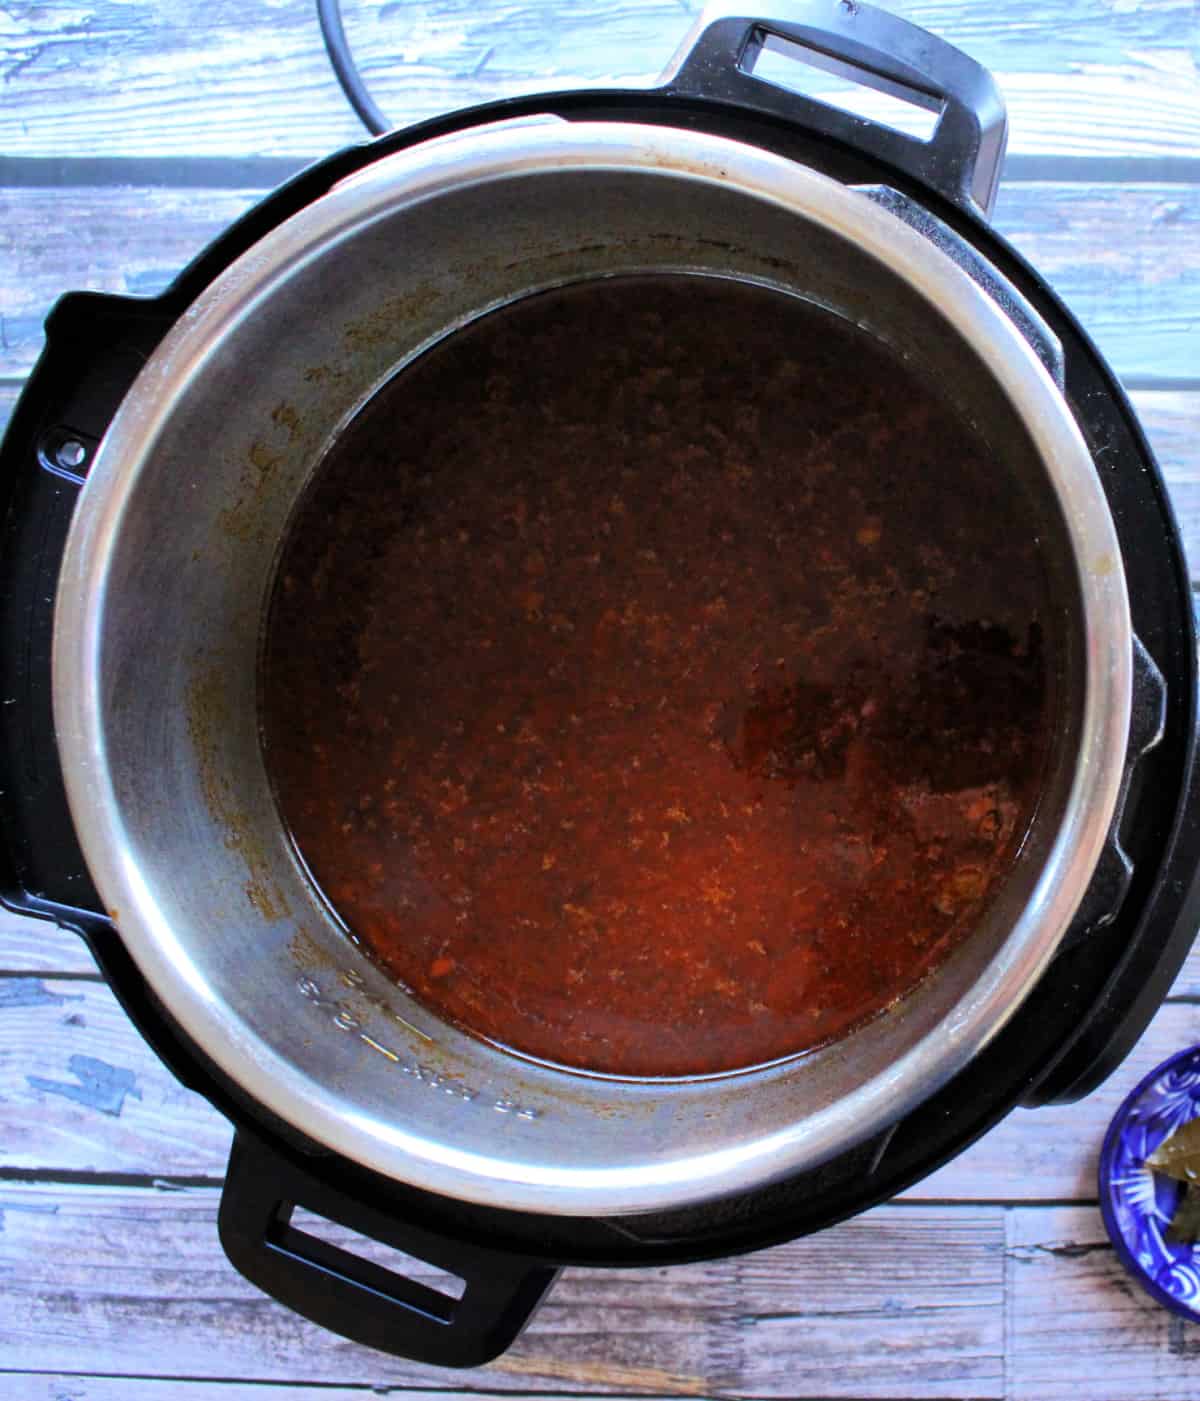 A picture of the birria consomme inside an instant pot.